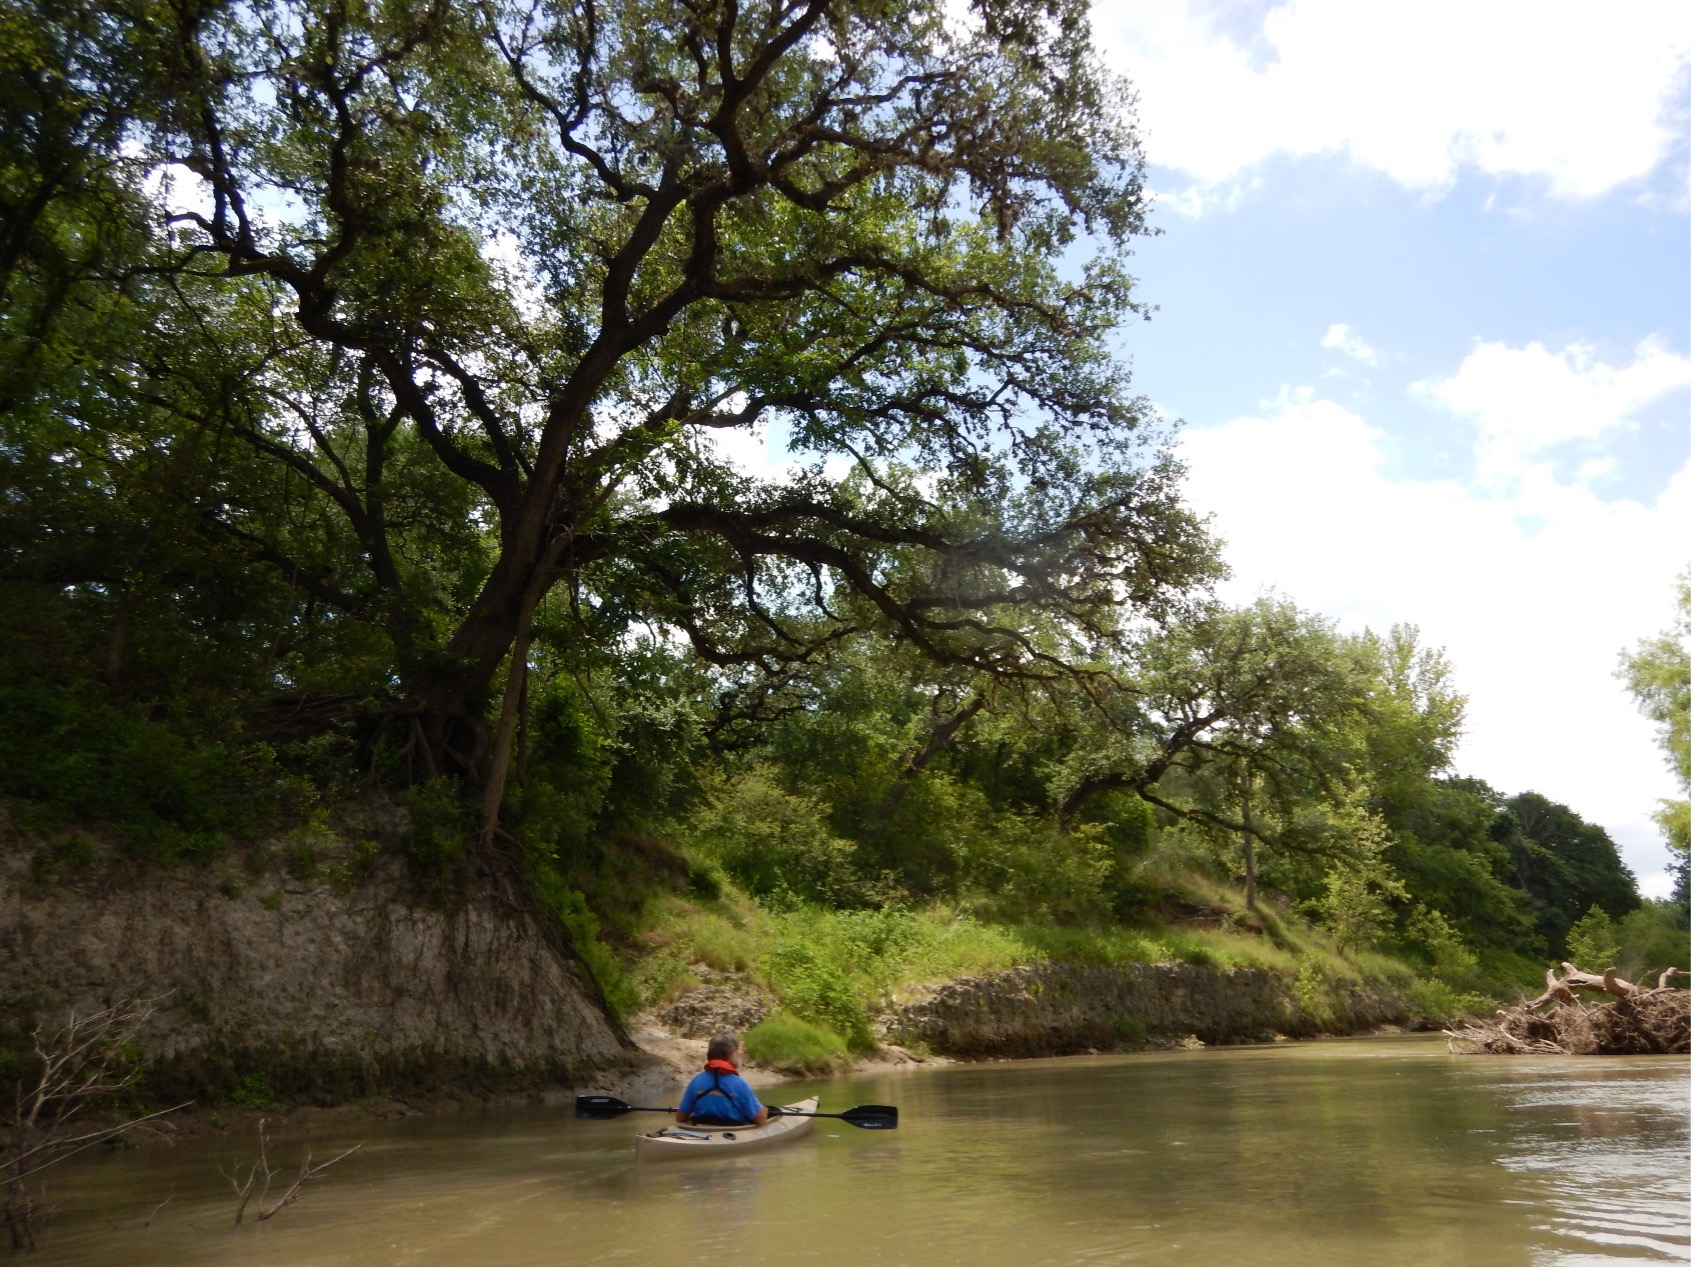 The Goliad Paddling Trail meanders through an area steeped in Texas history.